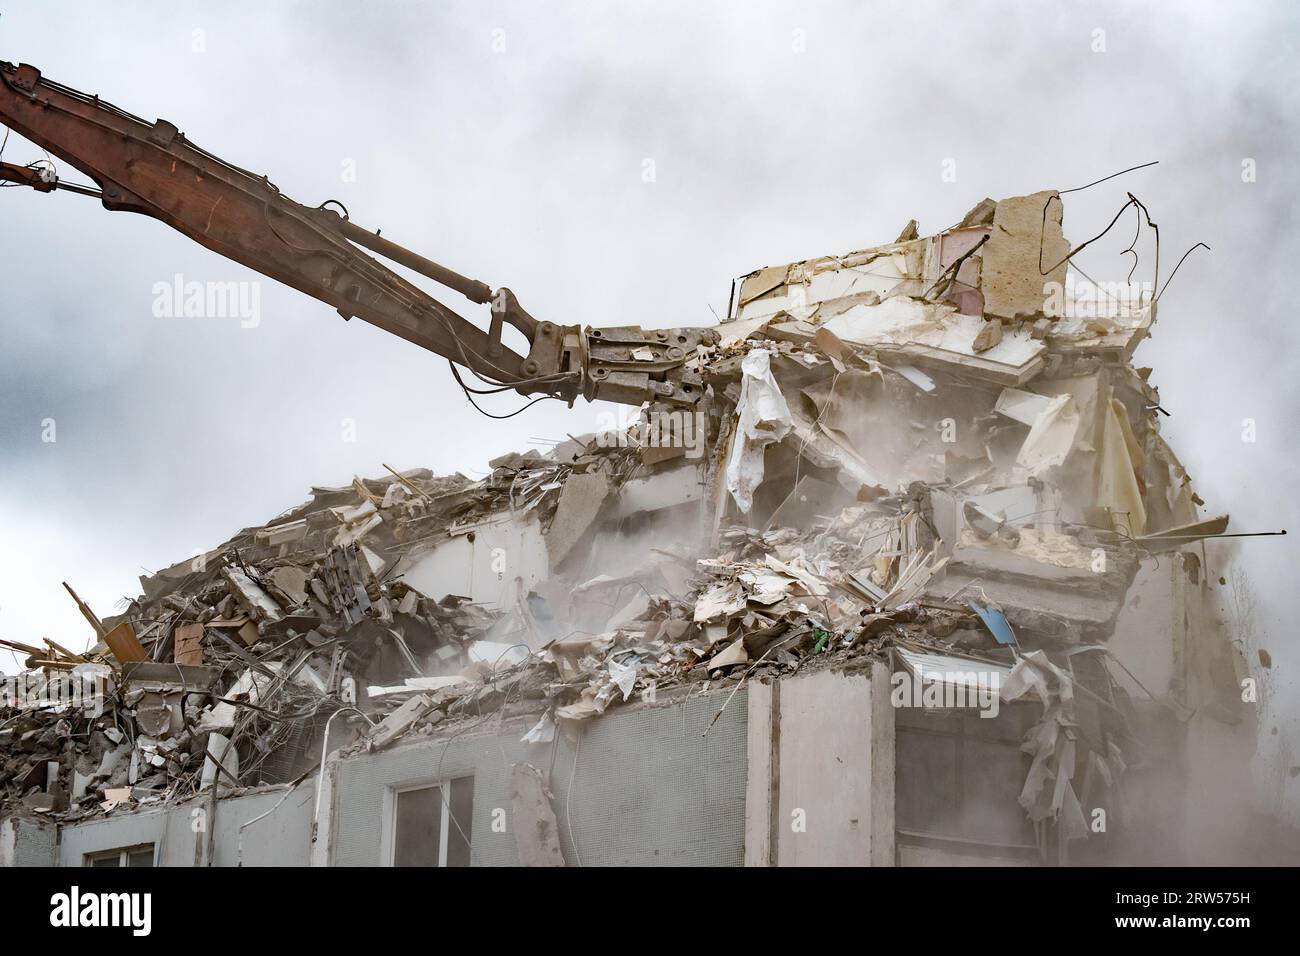 Demolition of a residential house using building hydraulic shears Stock Photo